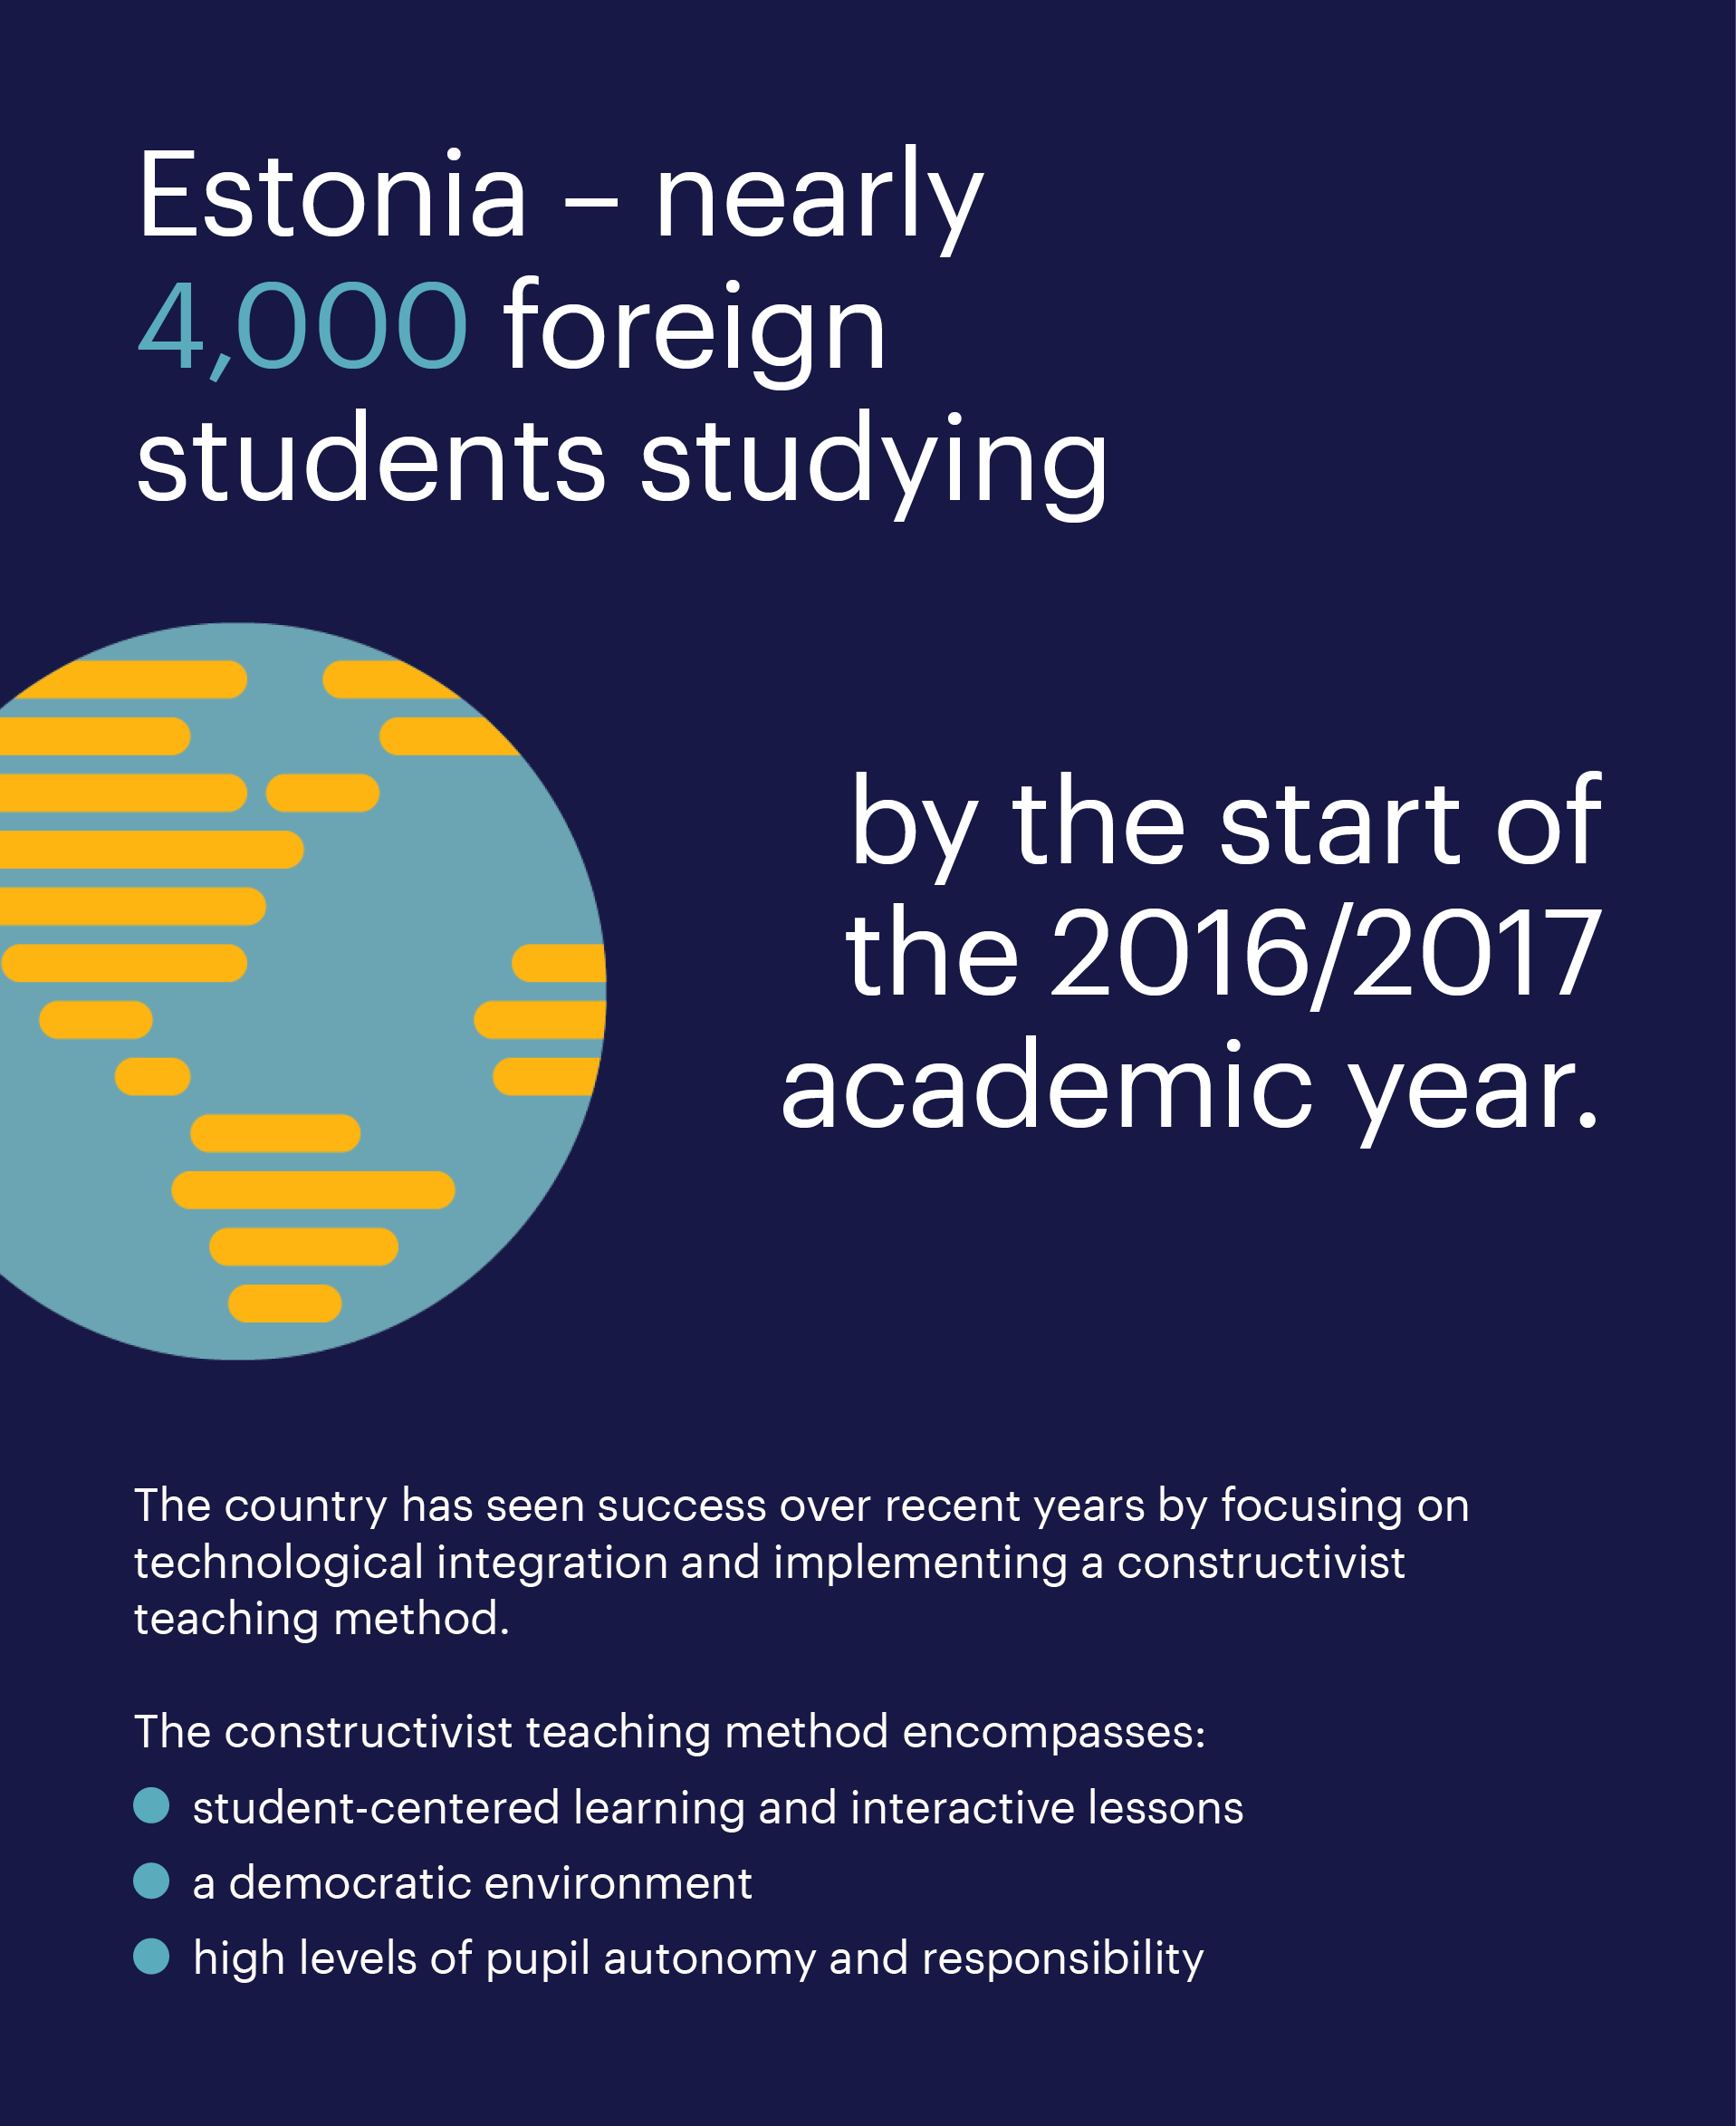 Nearly 4000 foreign students are studying in Estonia.